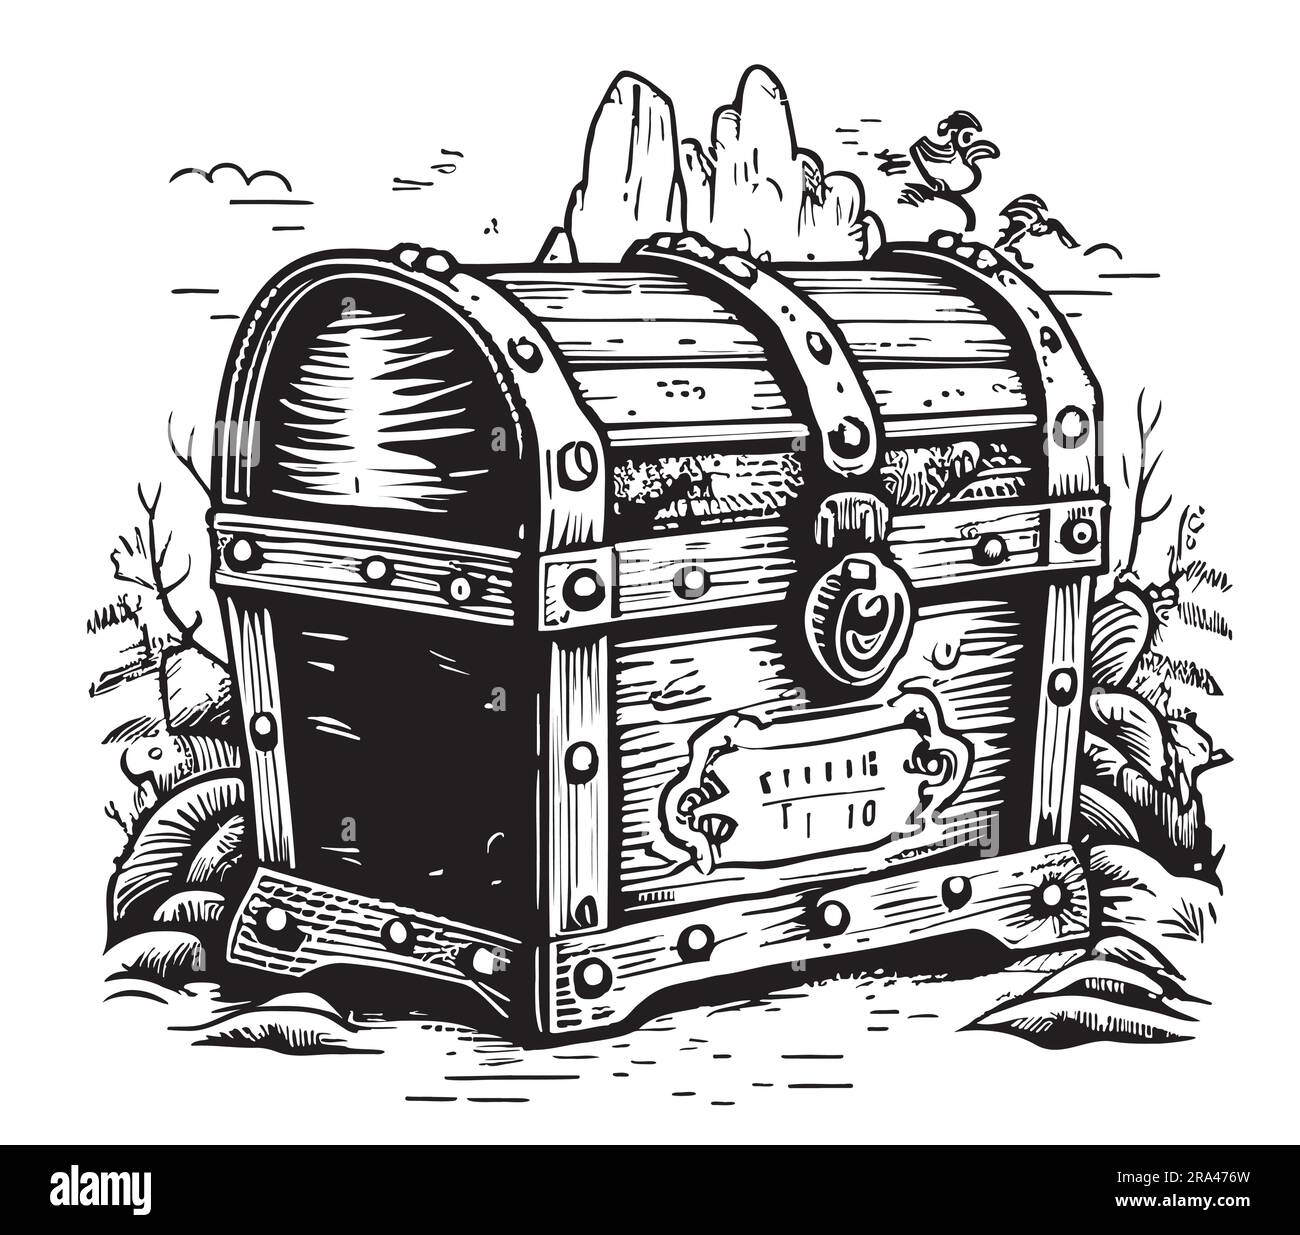 Treasure chest sketch hand drawn in doodle style illustration Stock Vector